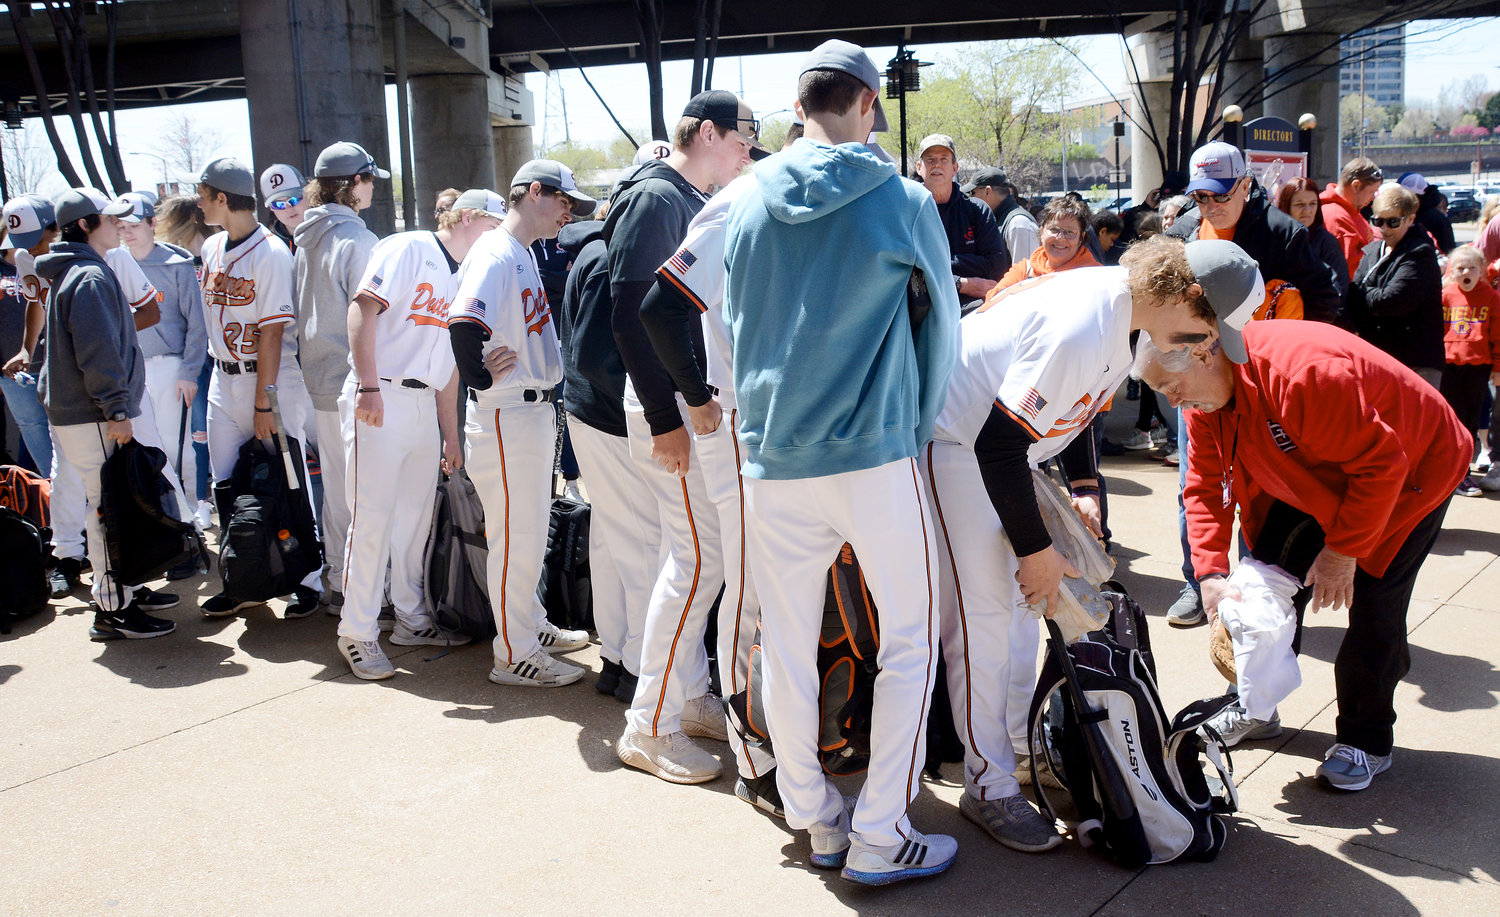 St. Louis Cardinals personnel searched bags prior to the Dutchmen baseball team entering the stadium.